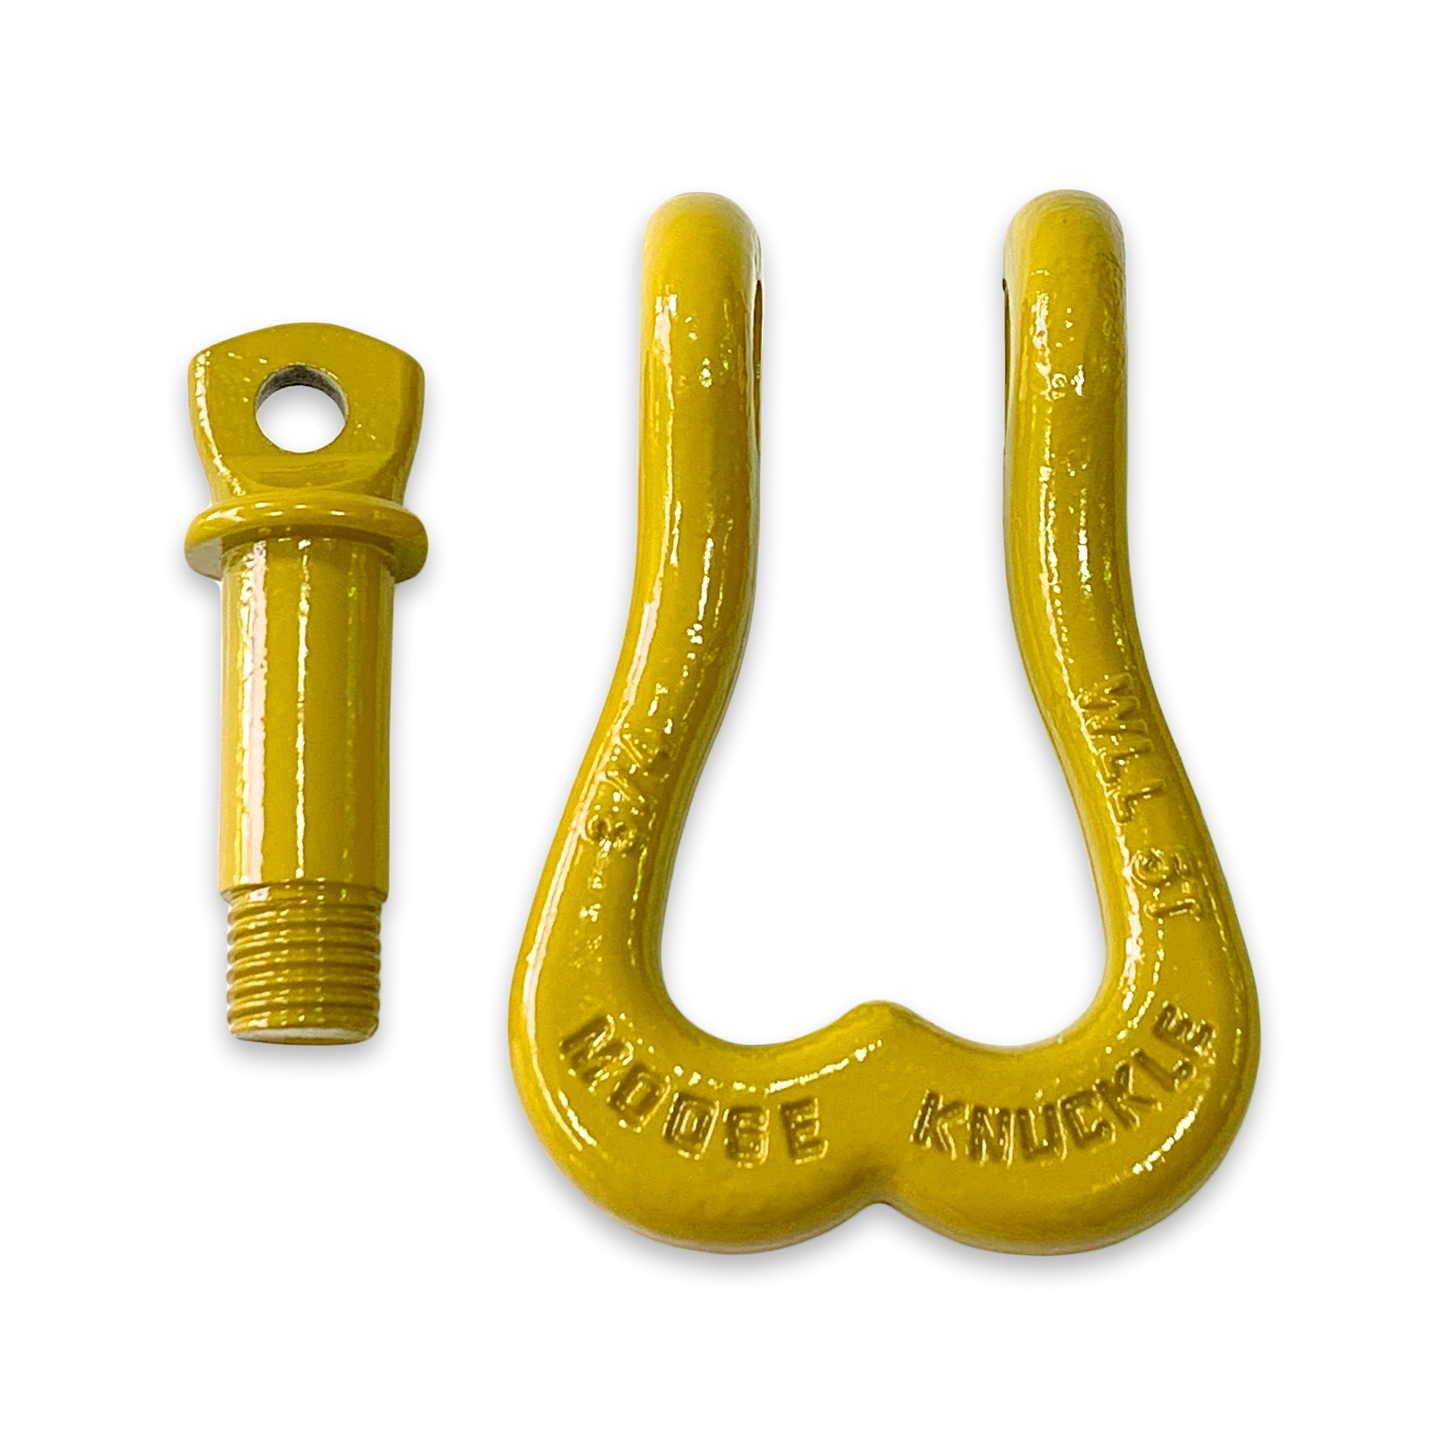 Moose Knuckle XL Detonator Yellow Heavy Duty Extra Strong Patent Pending 3/4" Shackle for Off-Road Vehicle Recovery to Replace Bull Balls